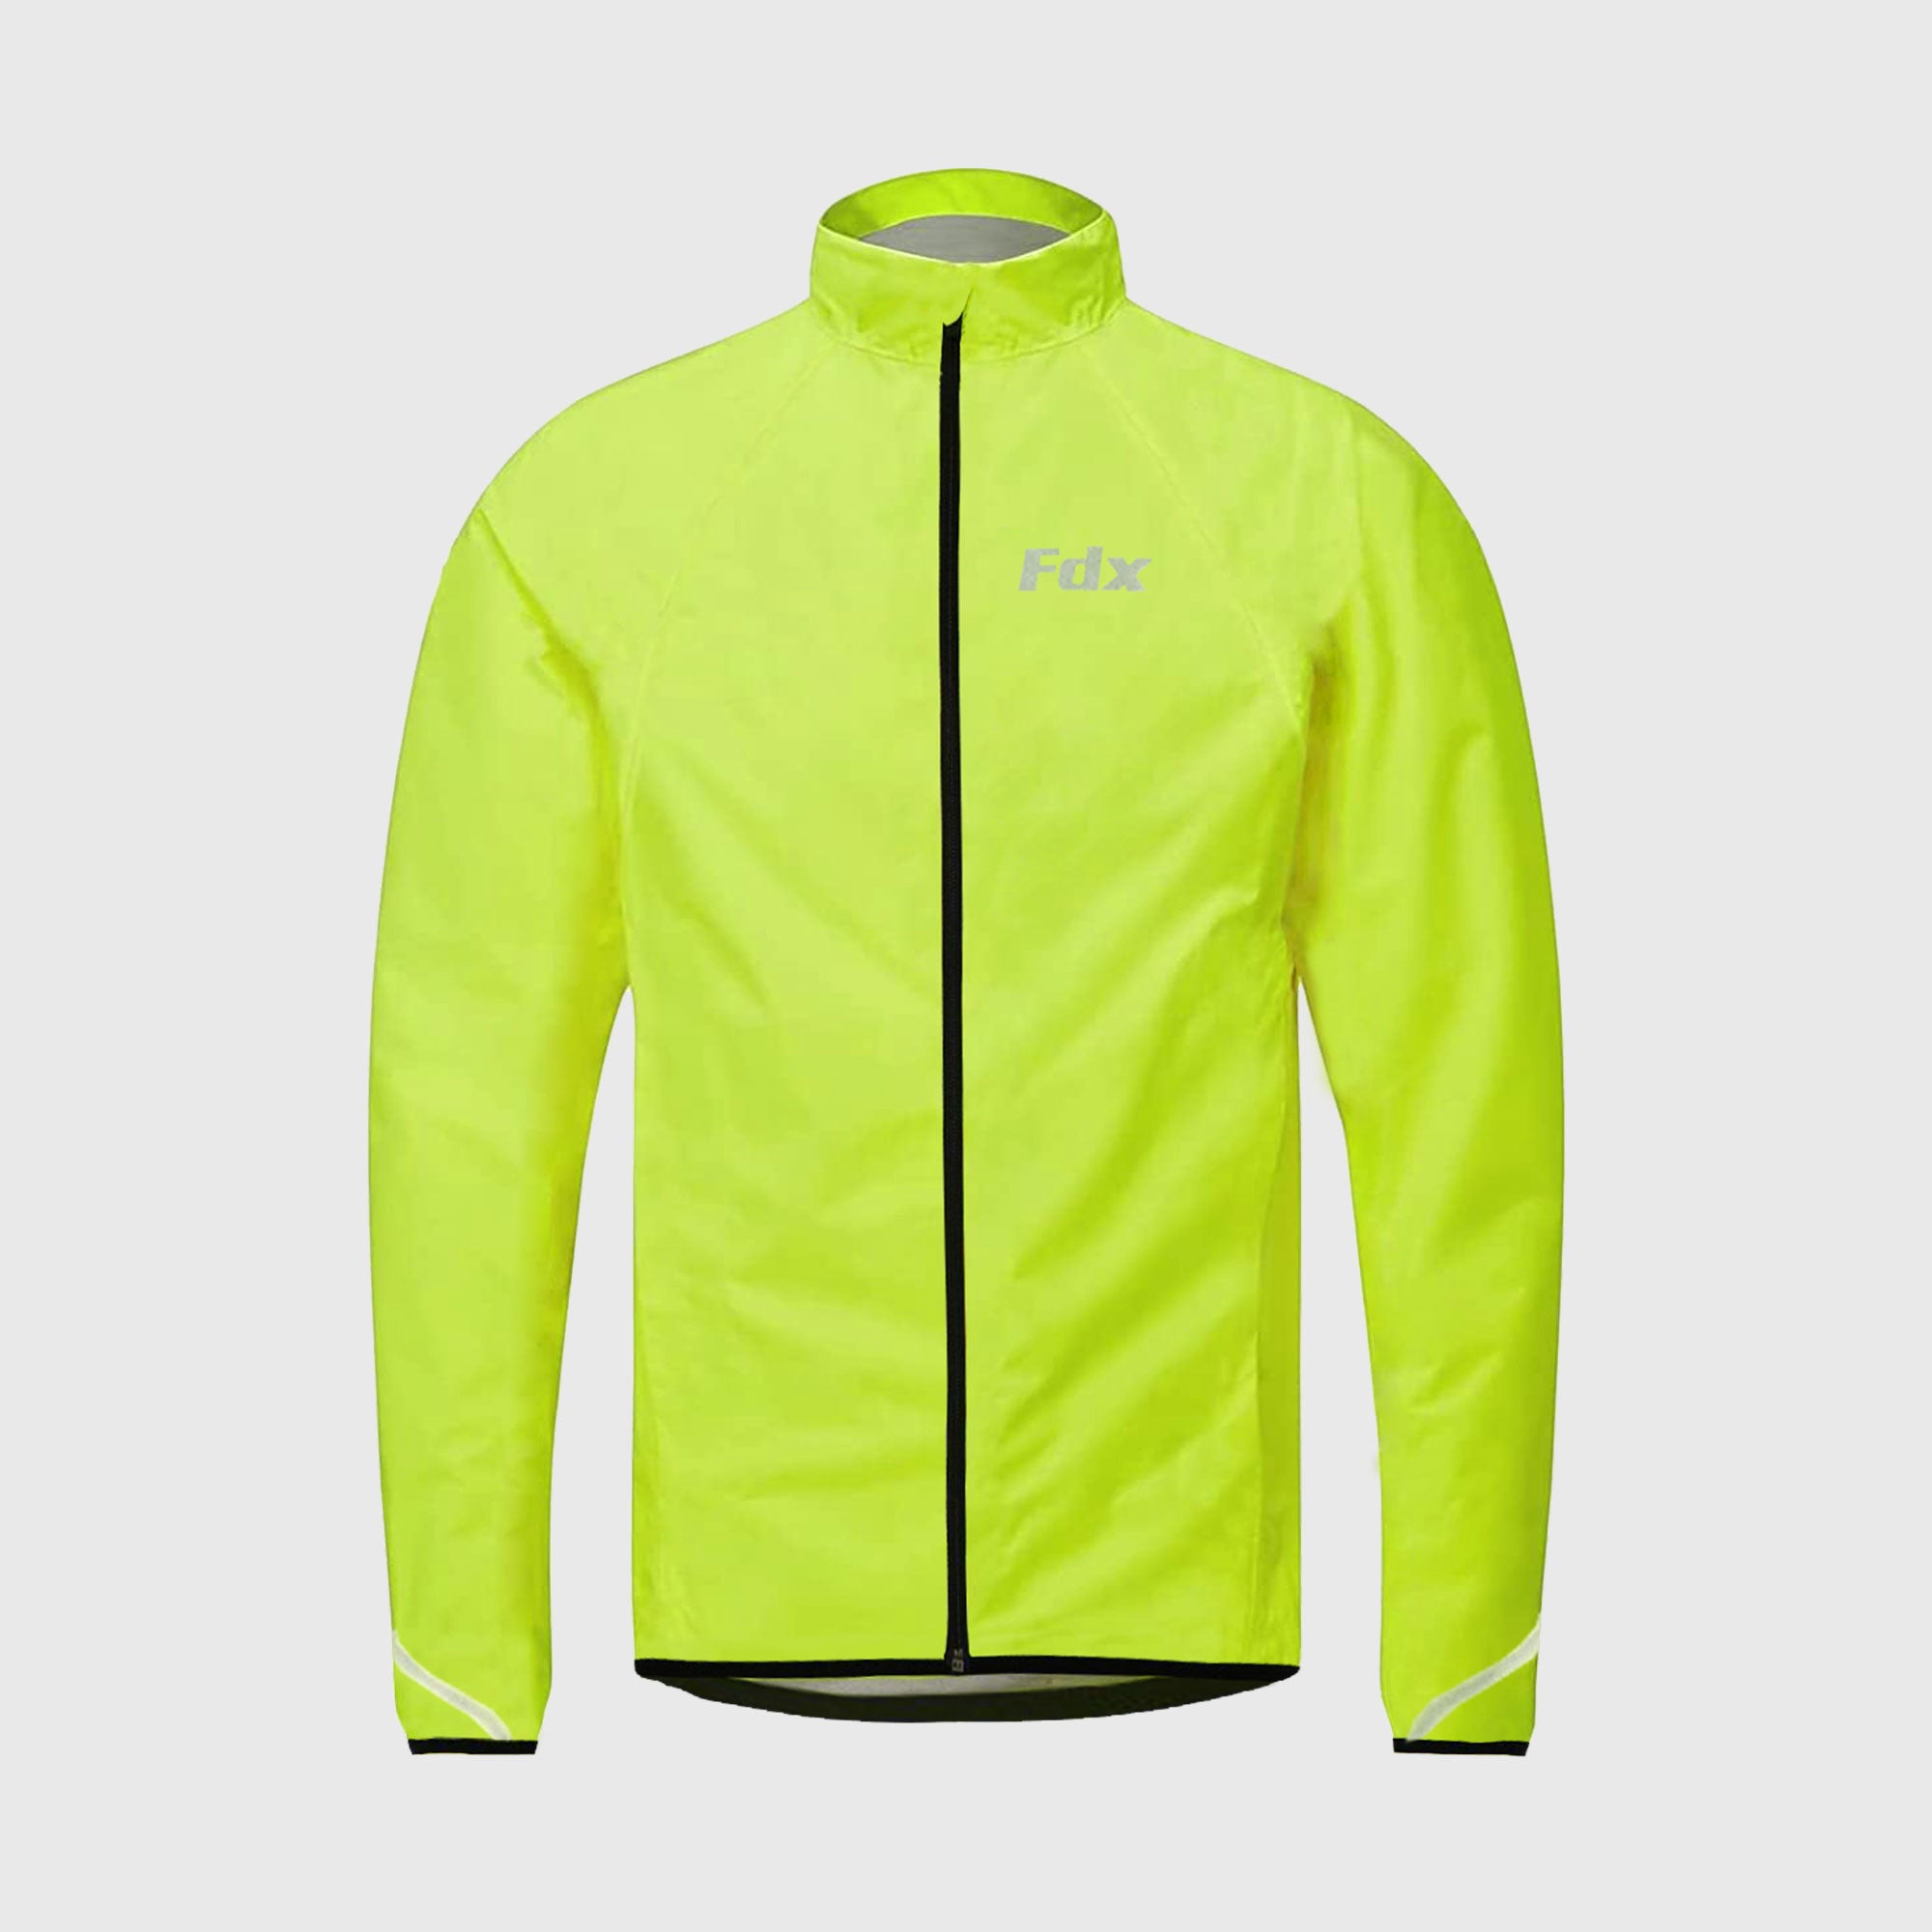 Women’s Yellow cycling jacket waterproof breathable quick dry MTB rain top, lightweight packable reflective rain jacket for riding running racing